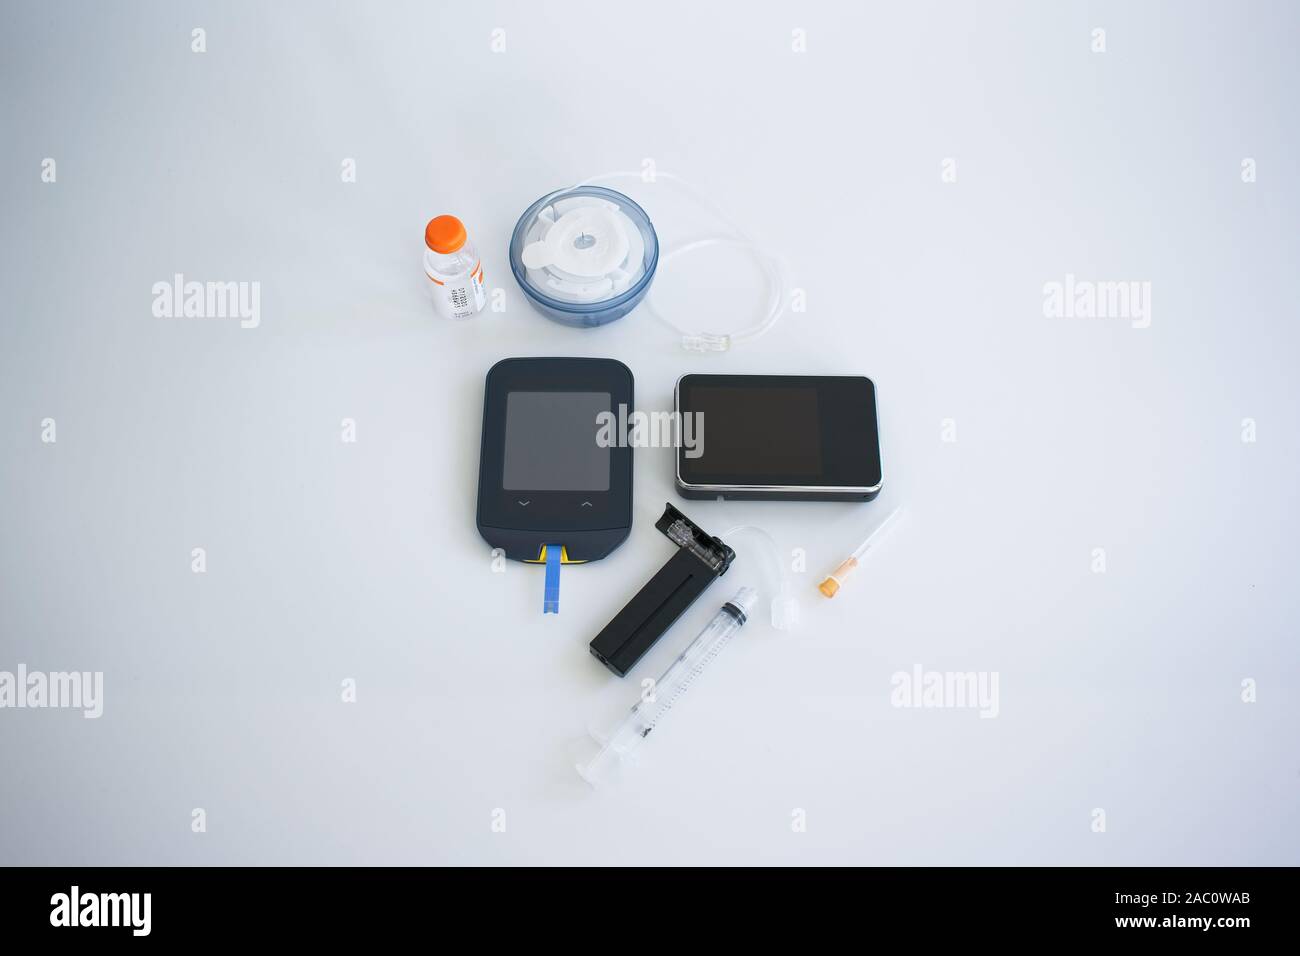 Insulin pump equipment and blood glucose tester Stock Photo